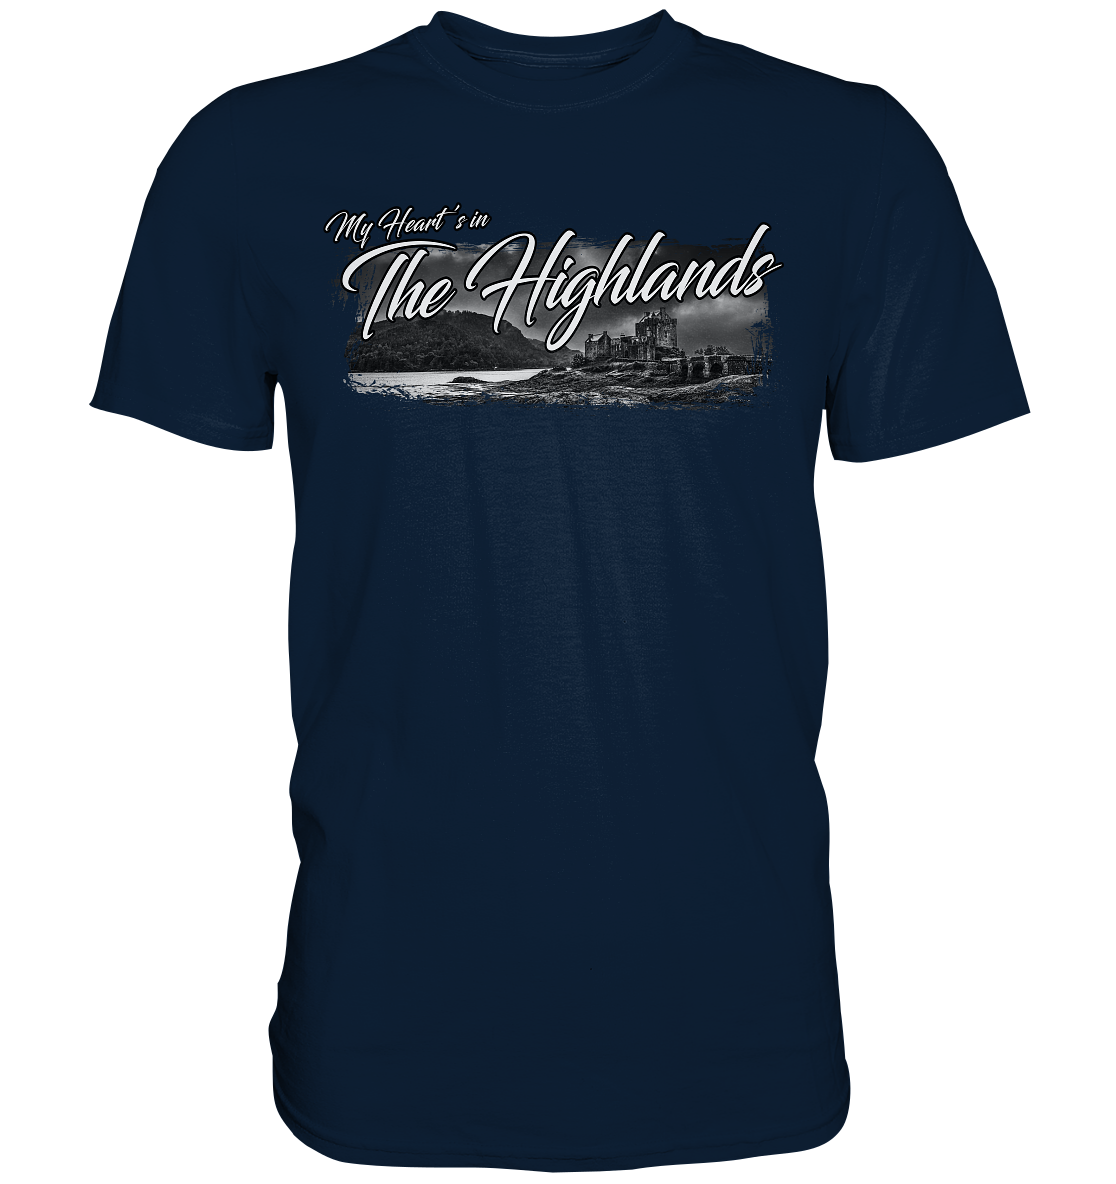 "My Heart's In The Highlands" - Premium Shirt